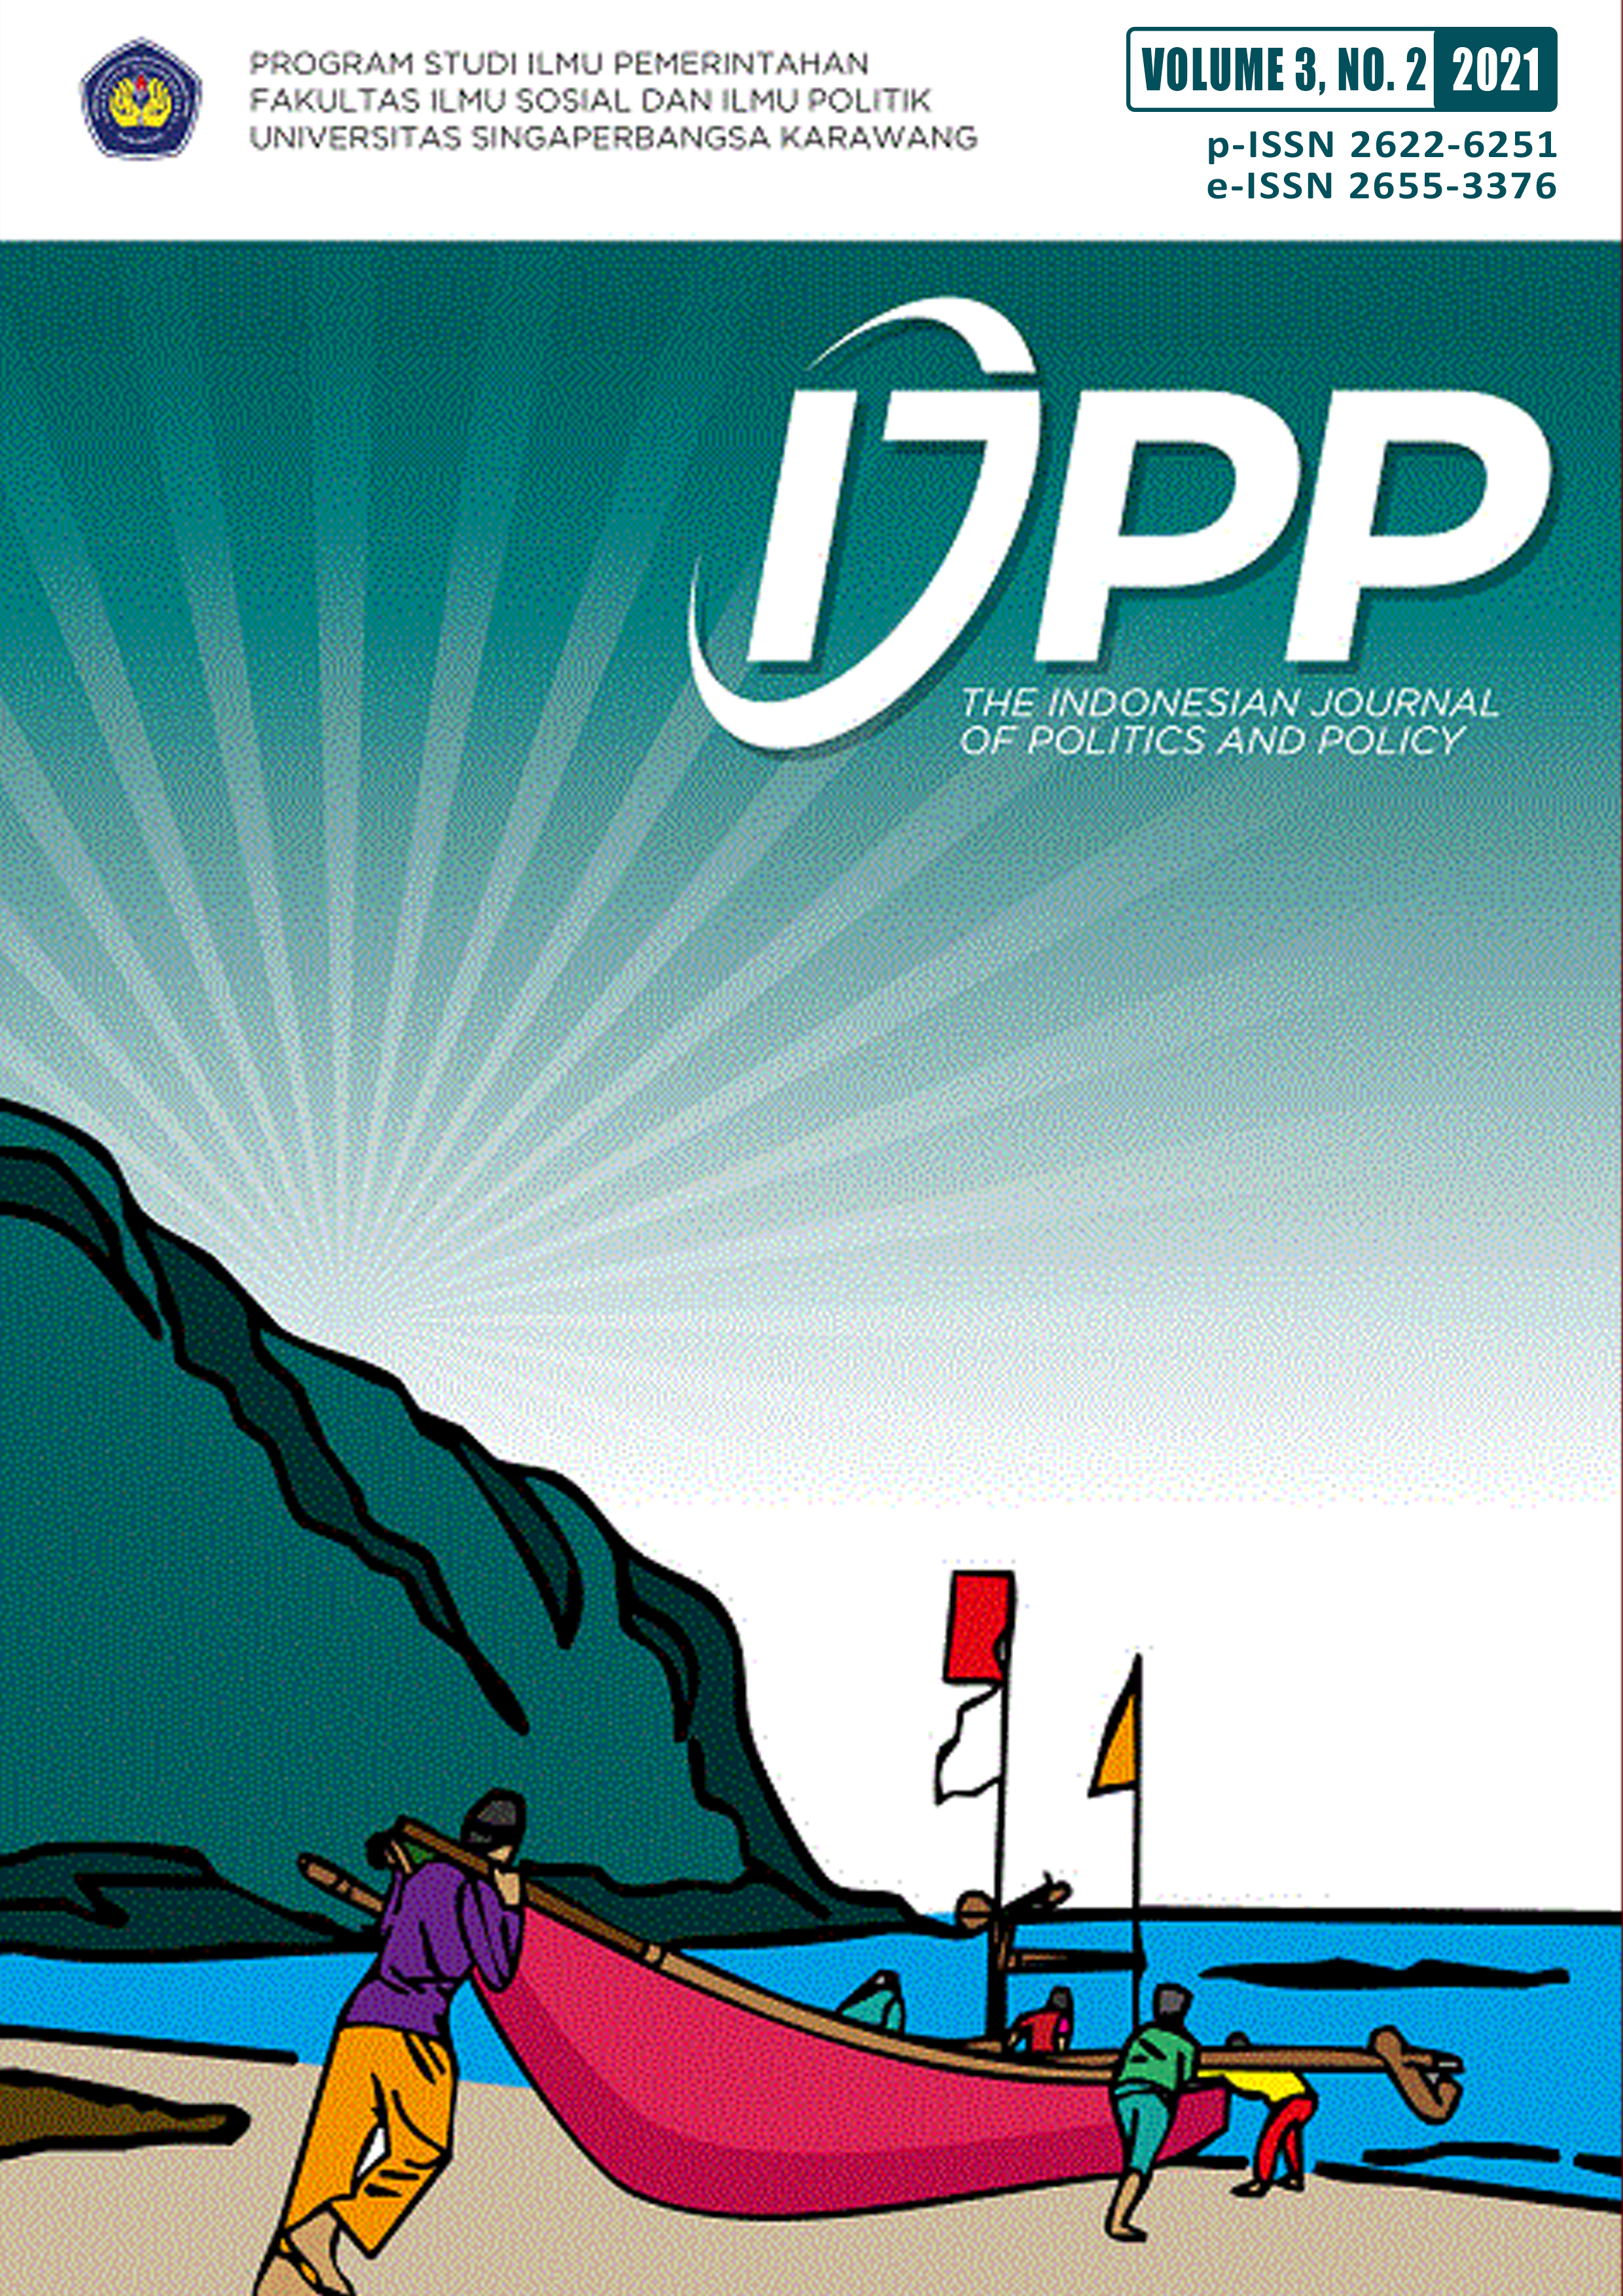 					Lihat Vol 3 No 2 (2021): THE INDONESIAN JOURNAL OF POLITICS AND POLICY
				